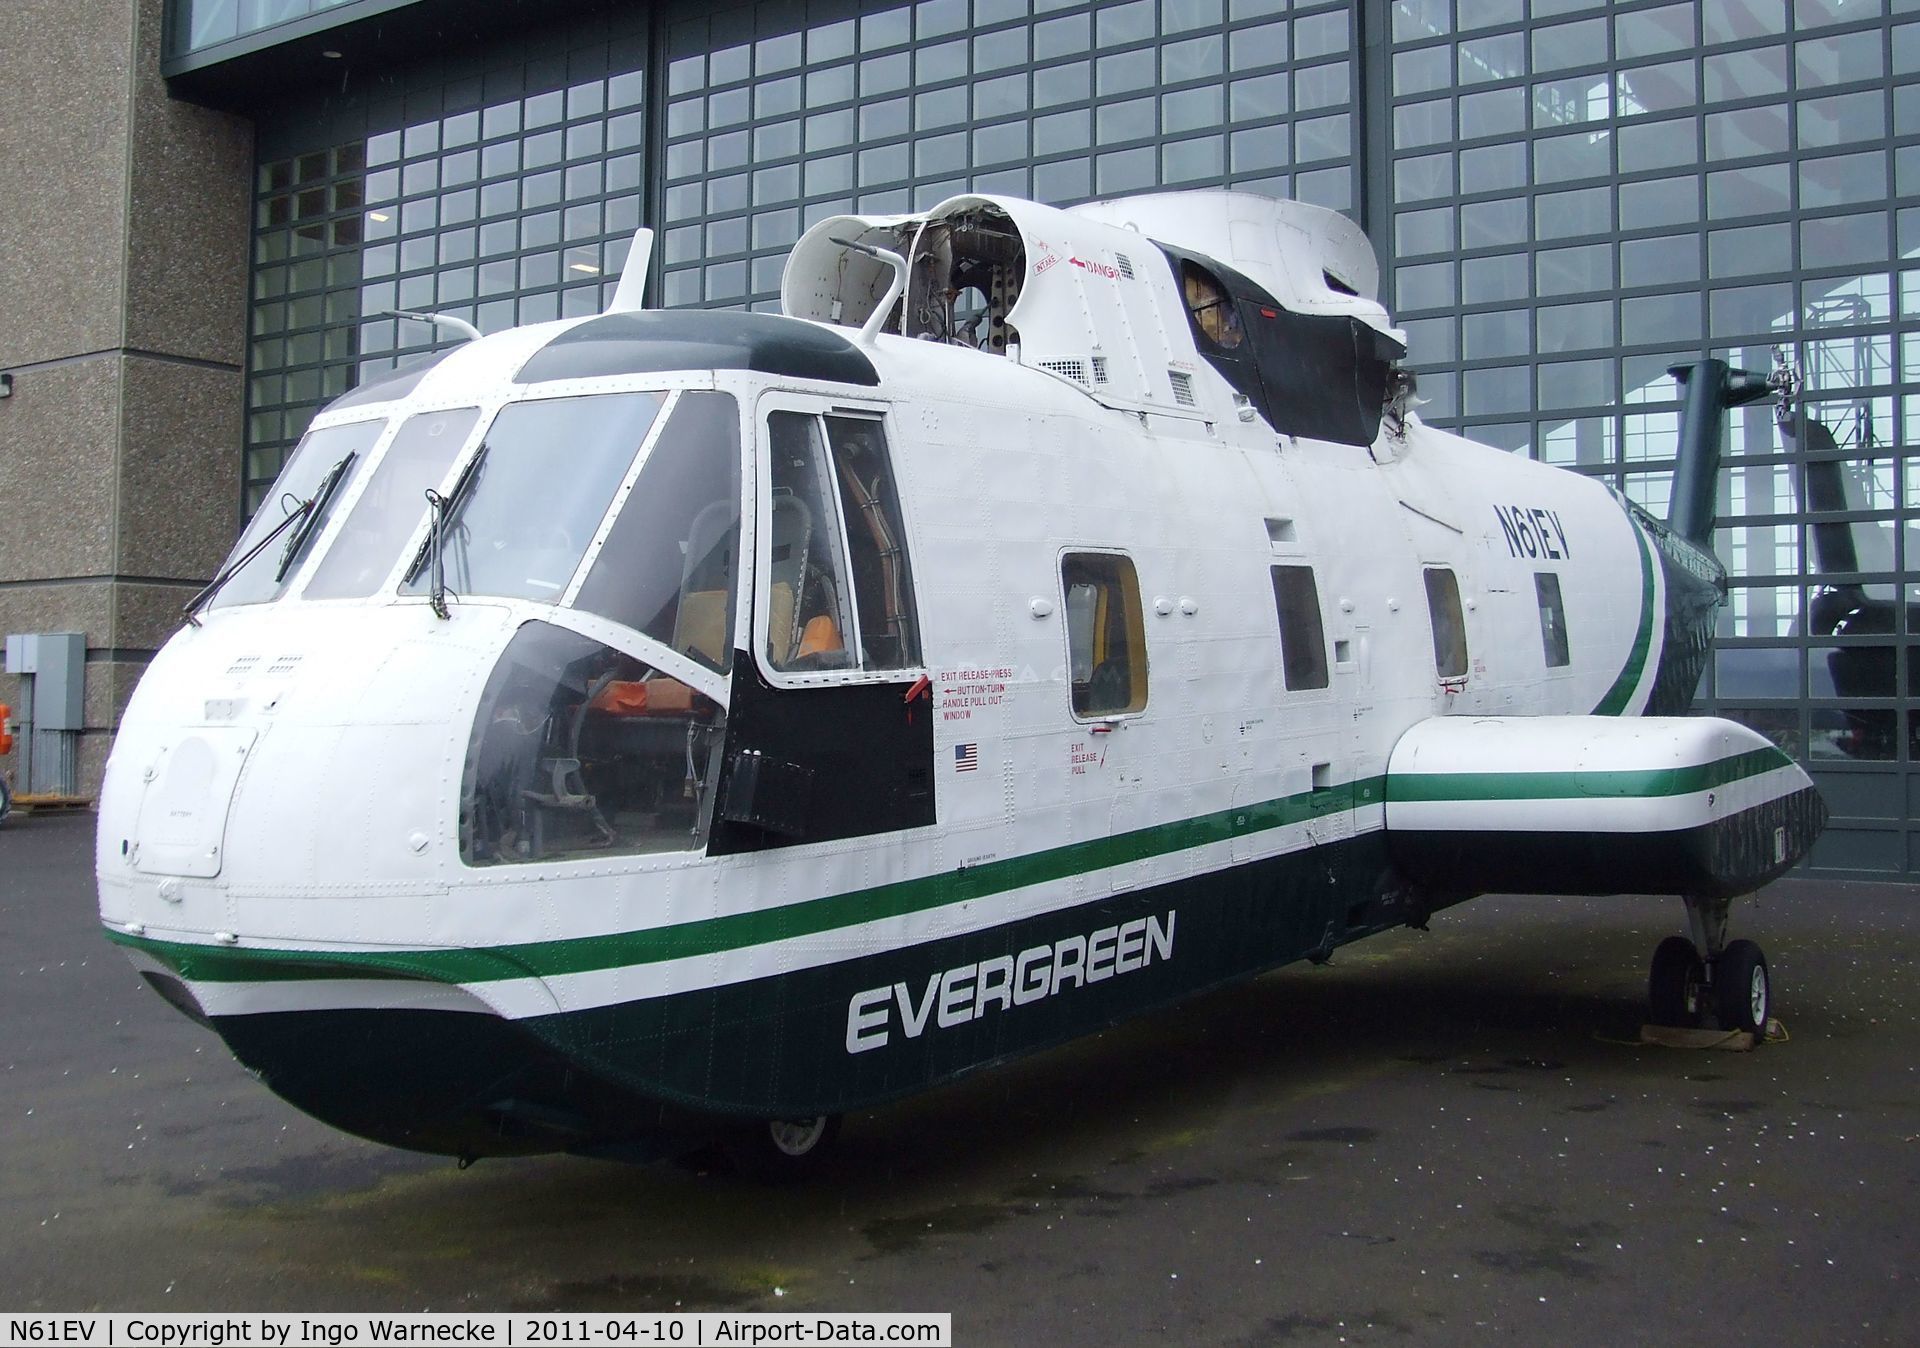 N61EV, Sikorsky S-61R (CH-3E) C/N 61-566, Sikorsky S-61R (CH-3E) at the Evergreen Aviation & Space Museum, McMinnville OR